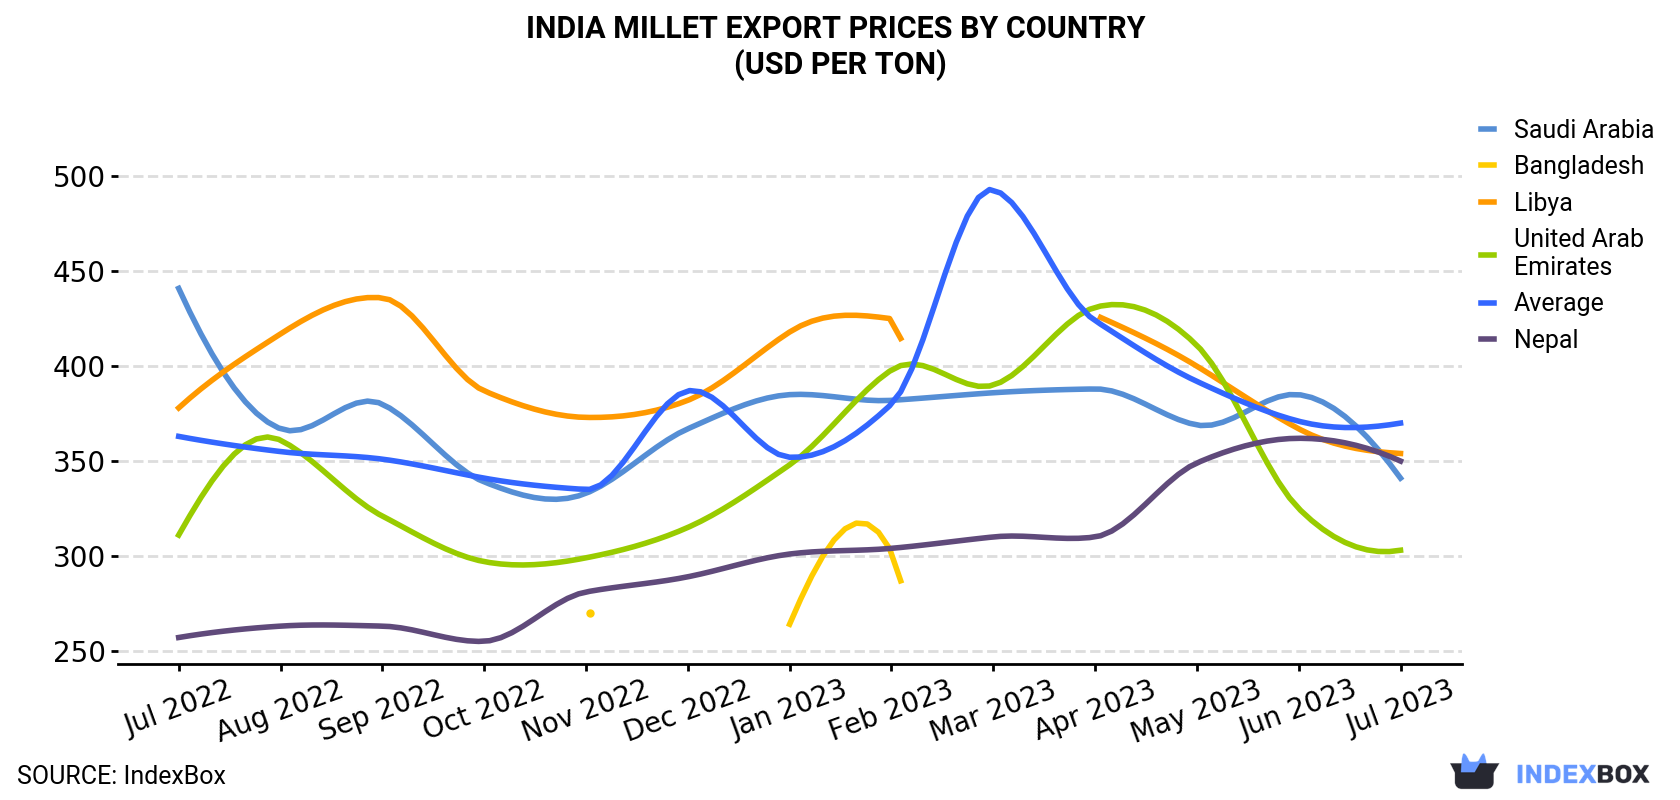 India Millet Export Prices By Country (USD Per Ton)